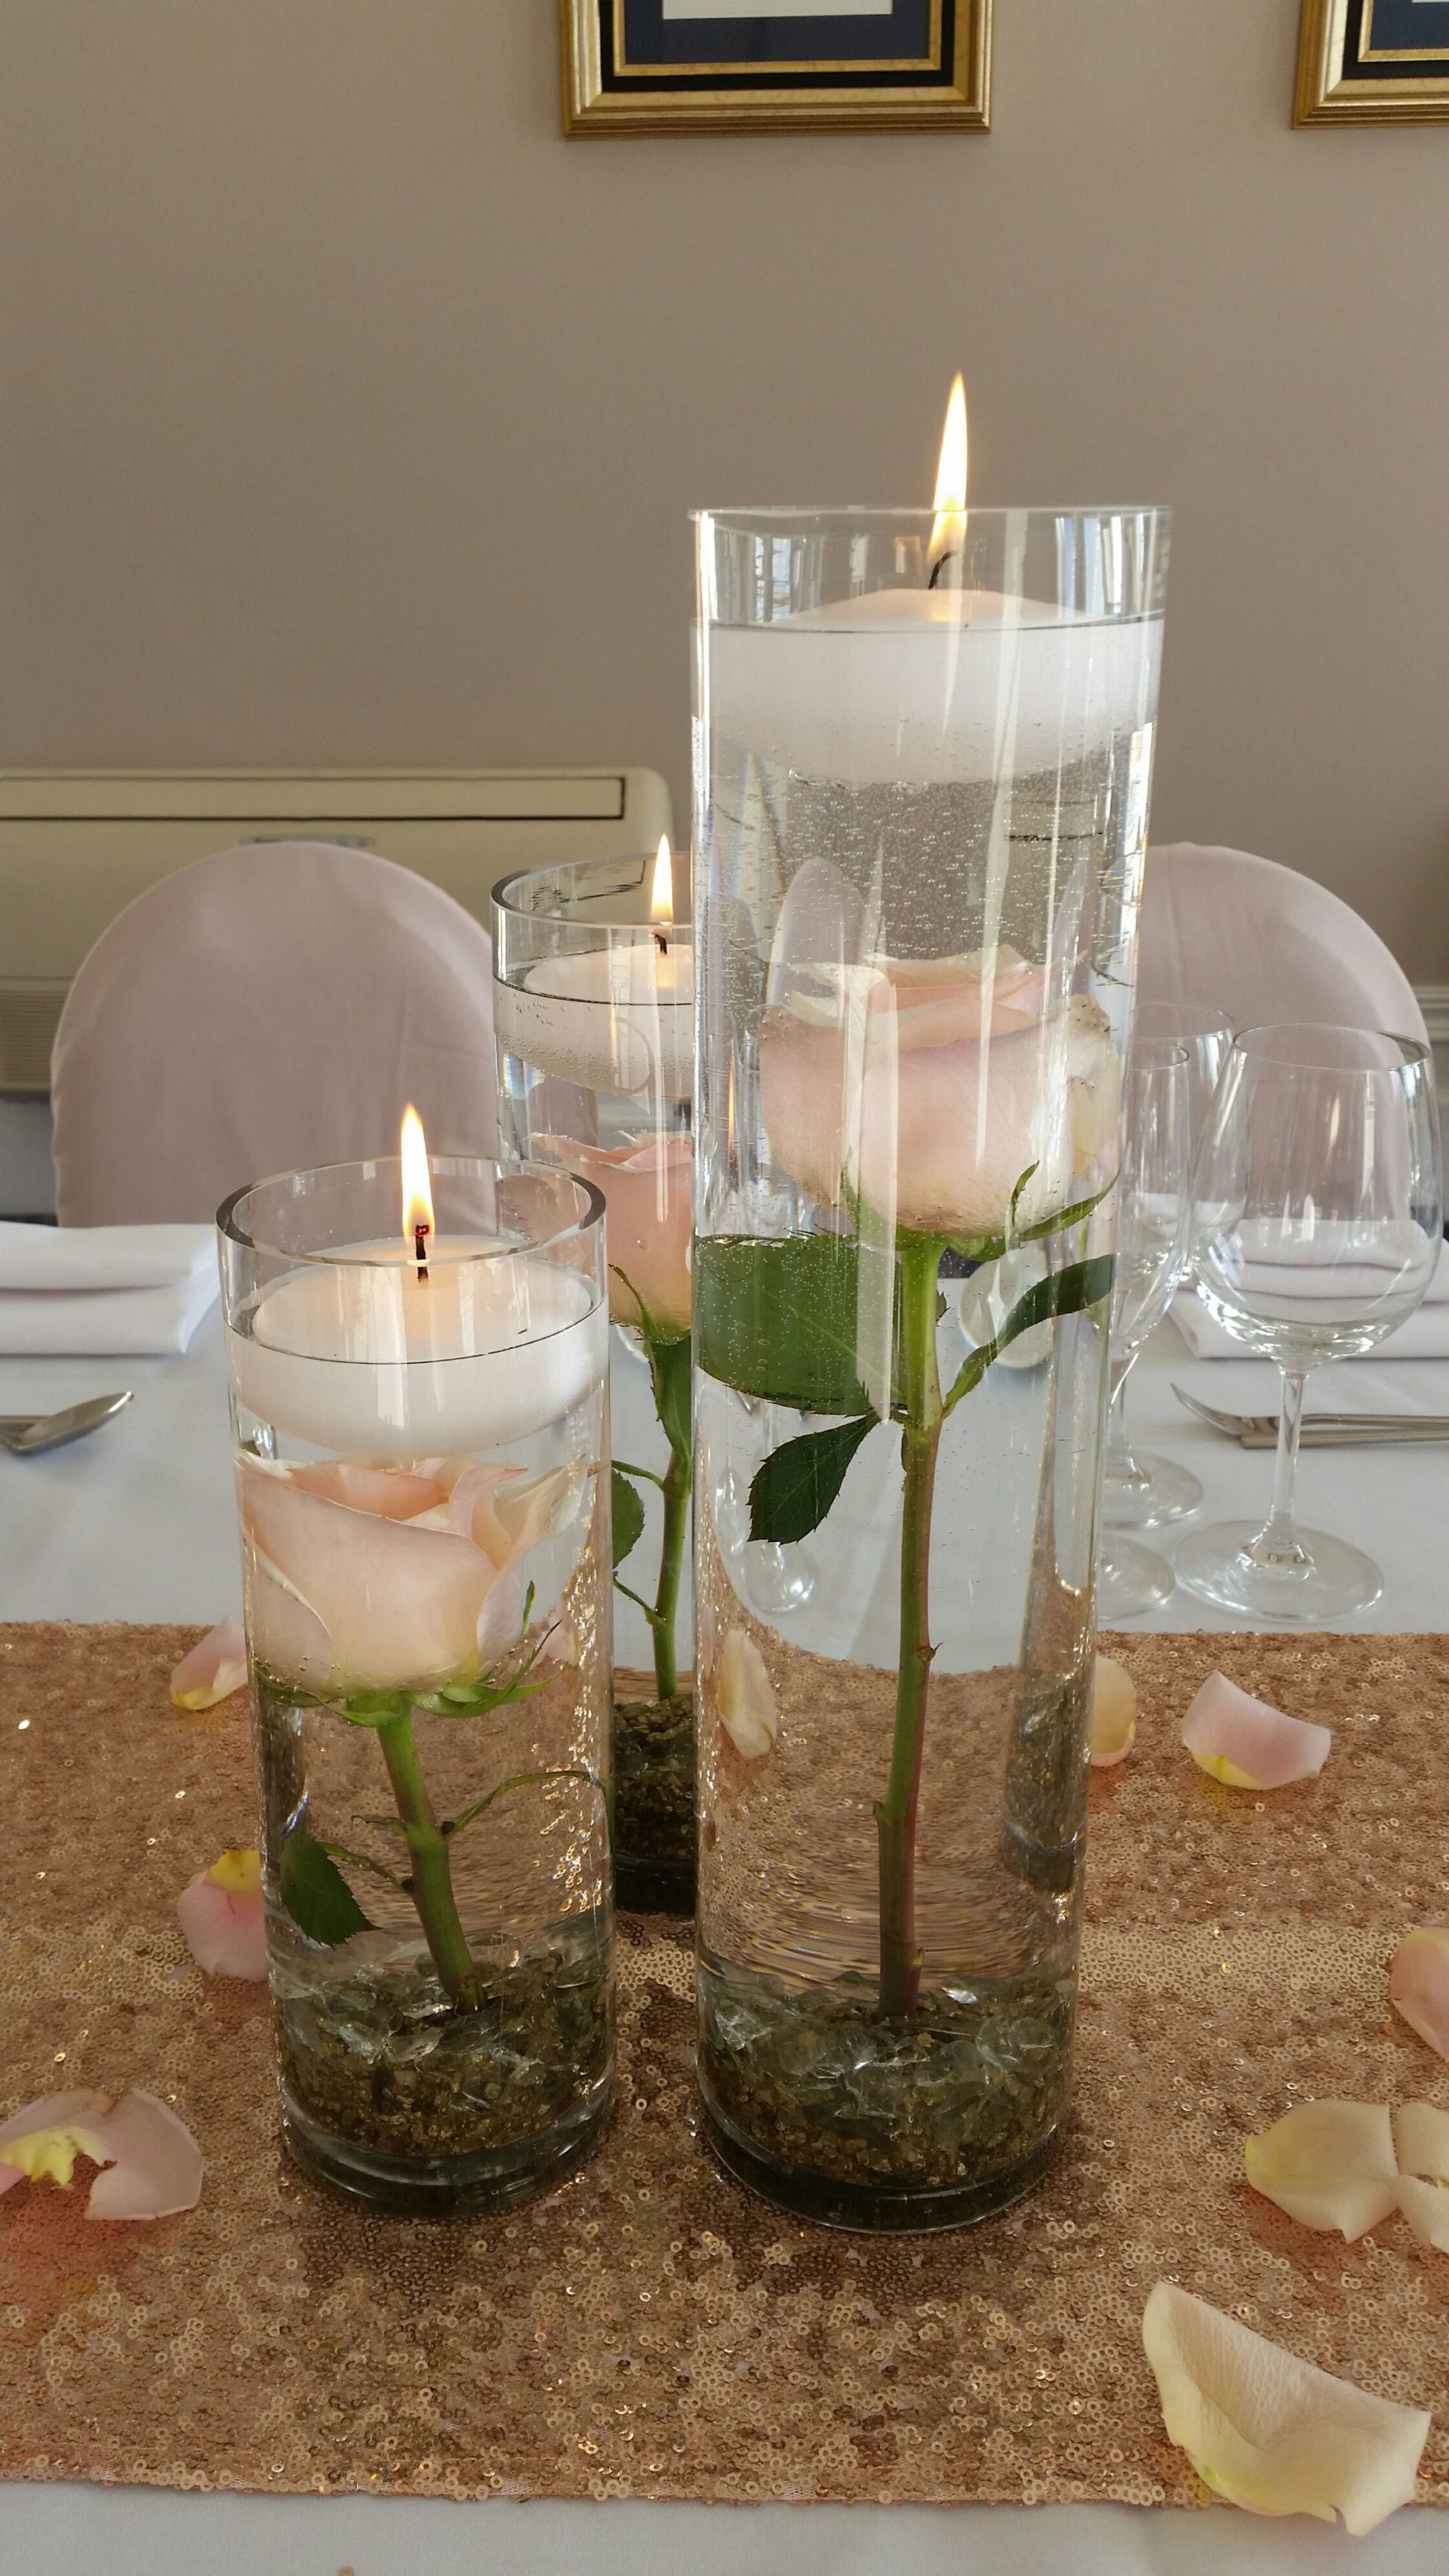 flowers submerged in water with floating candles